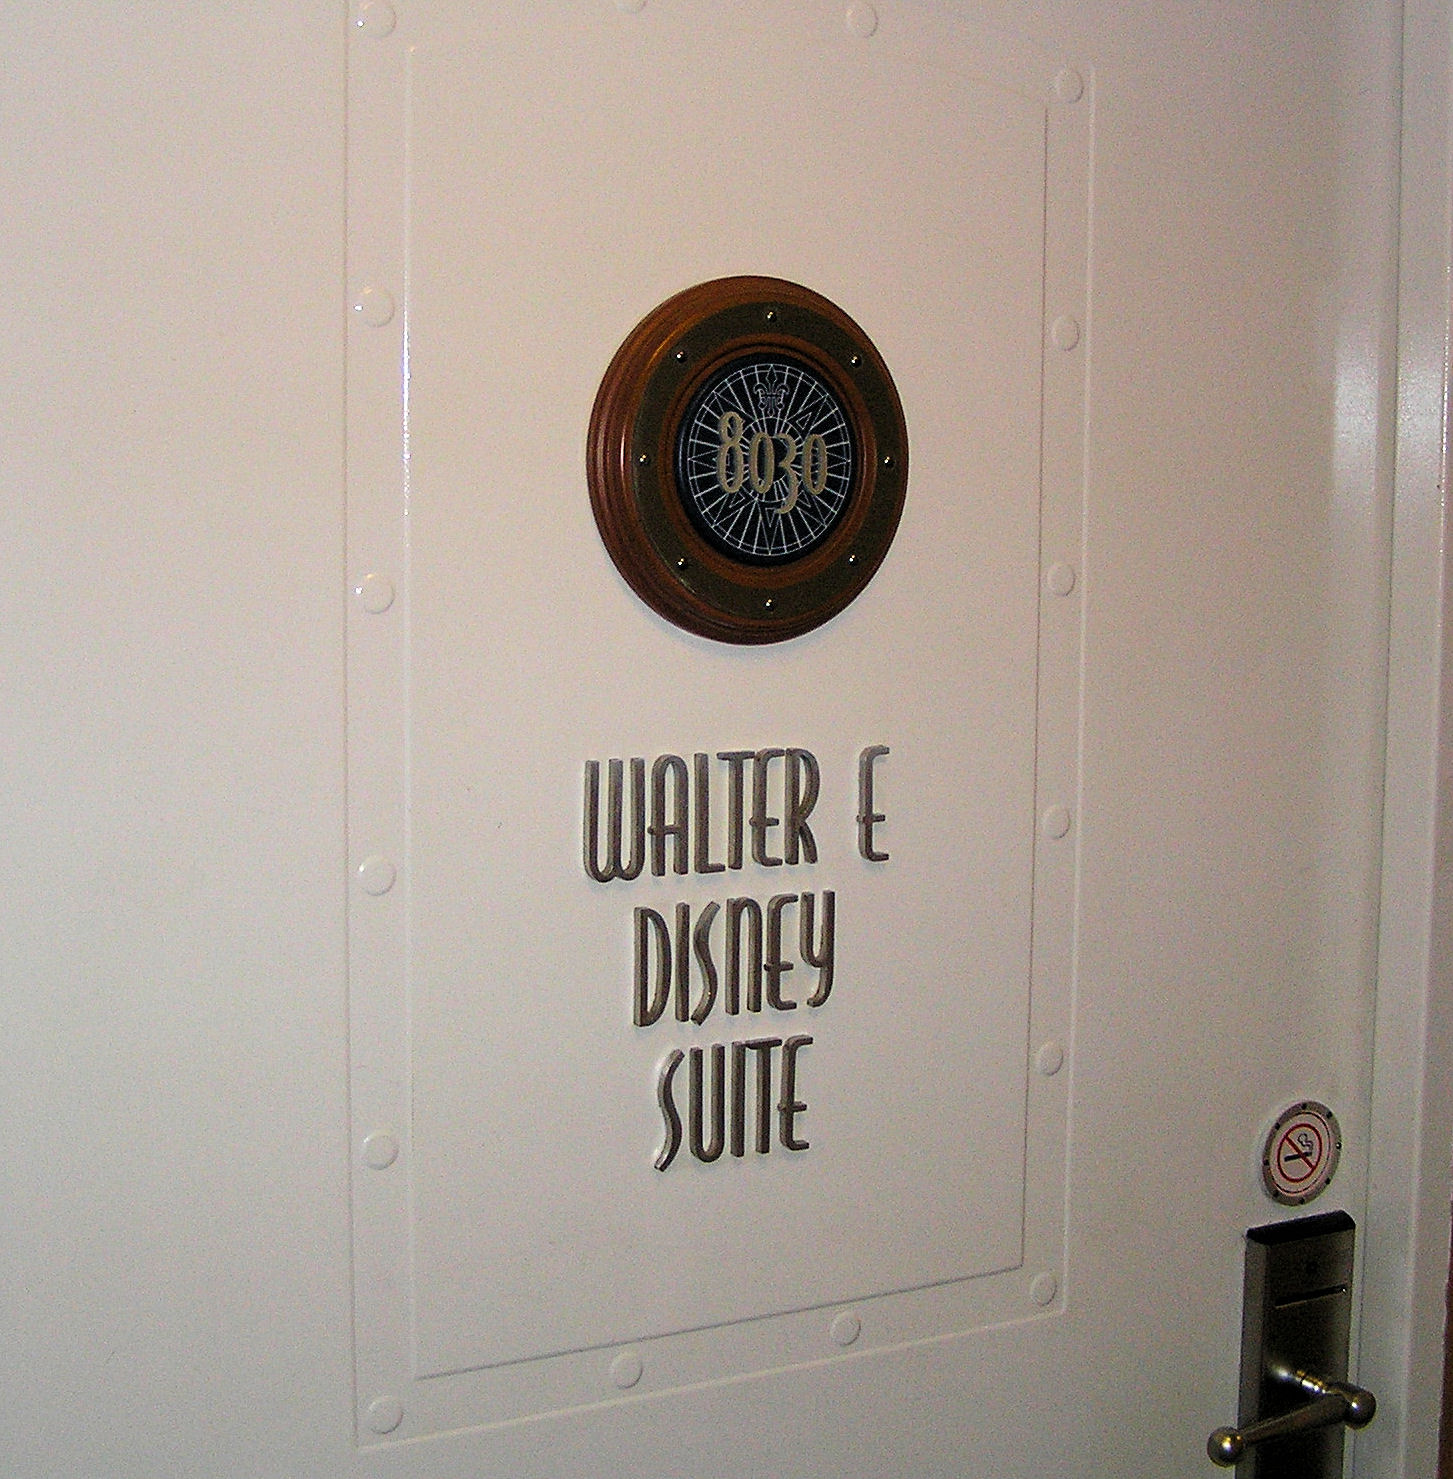 A door to one of the suites on the Disney Cruise Line.